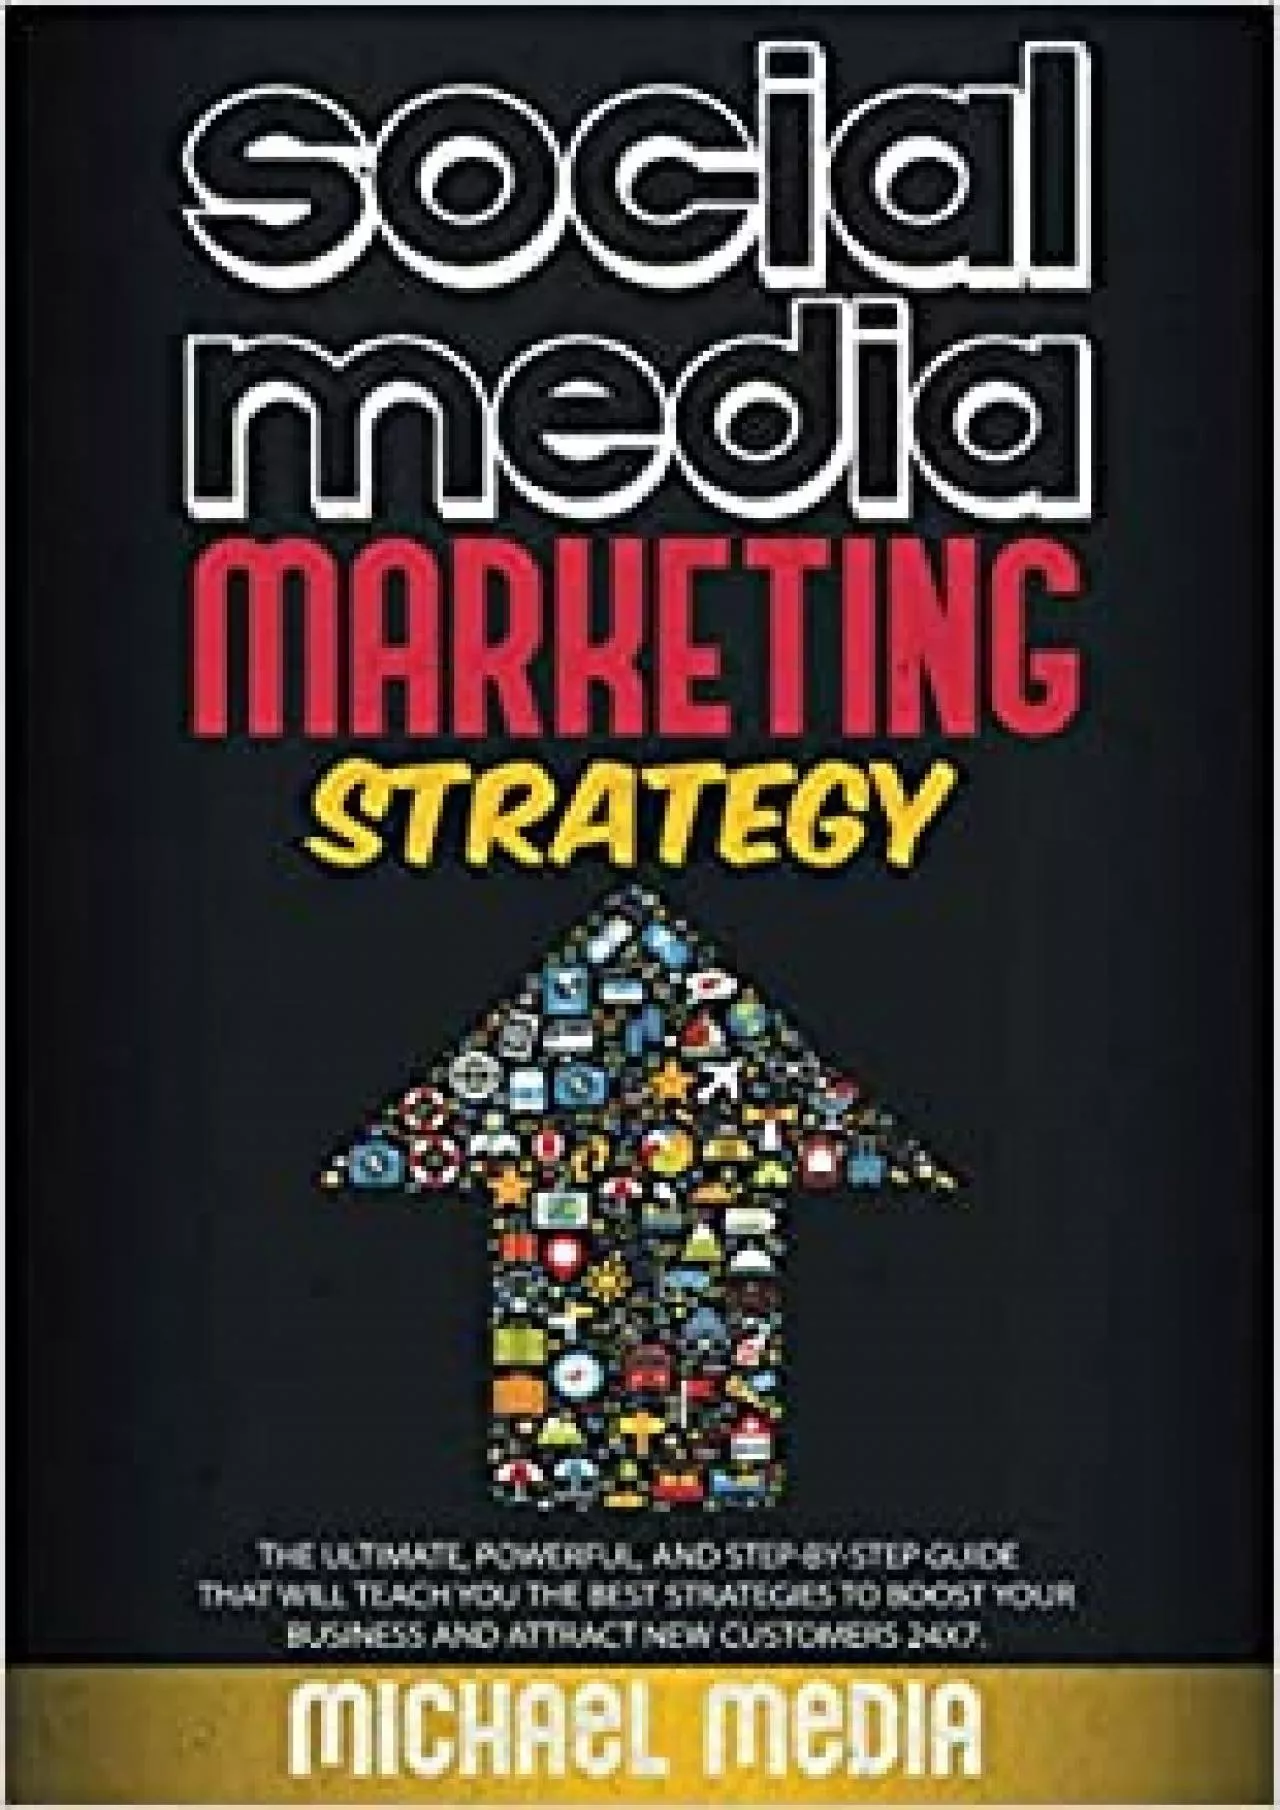 SOCIAL MEDIA MARKETING STRATEGY THE ULTIMATE POWERFUL AND STEPBYSTEP GUIDE THAT WILL TEACH